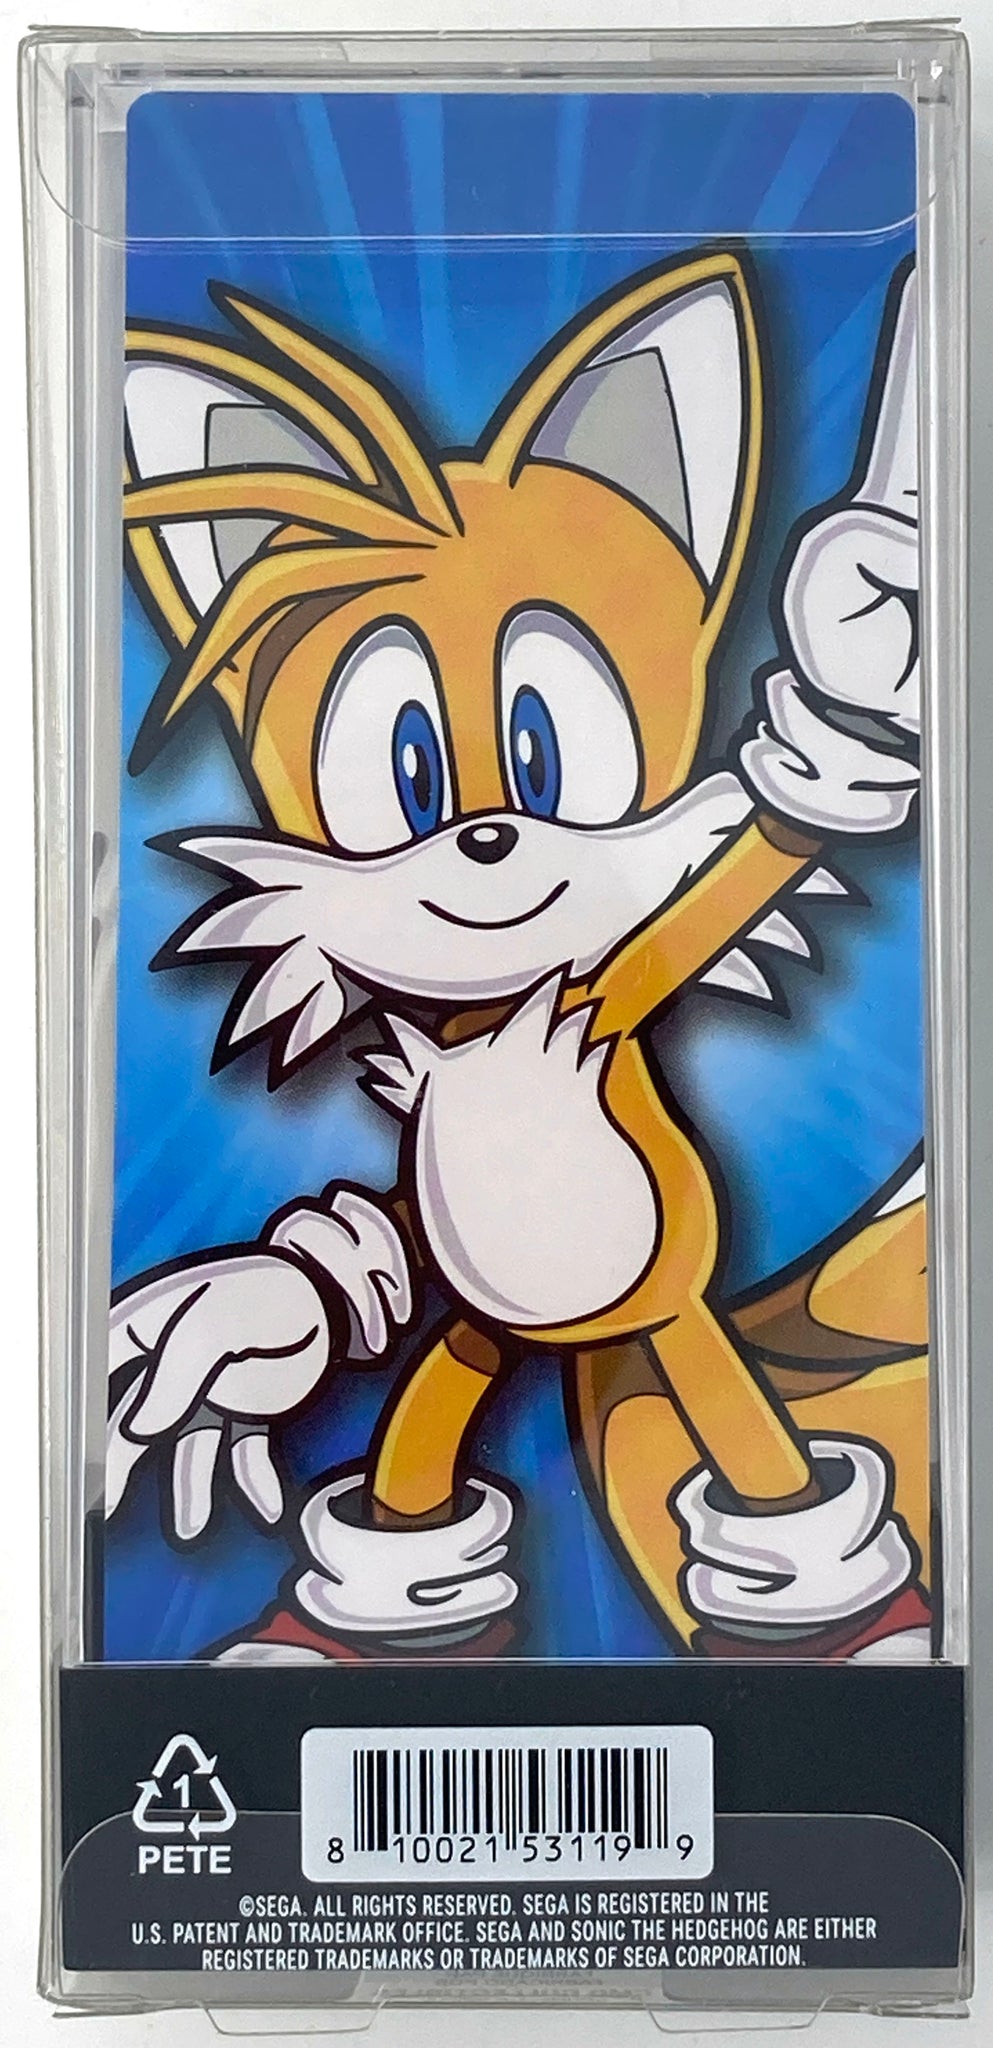 Sonic and Tails - Classic Sonic The Hedgehog Collectible Pin